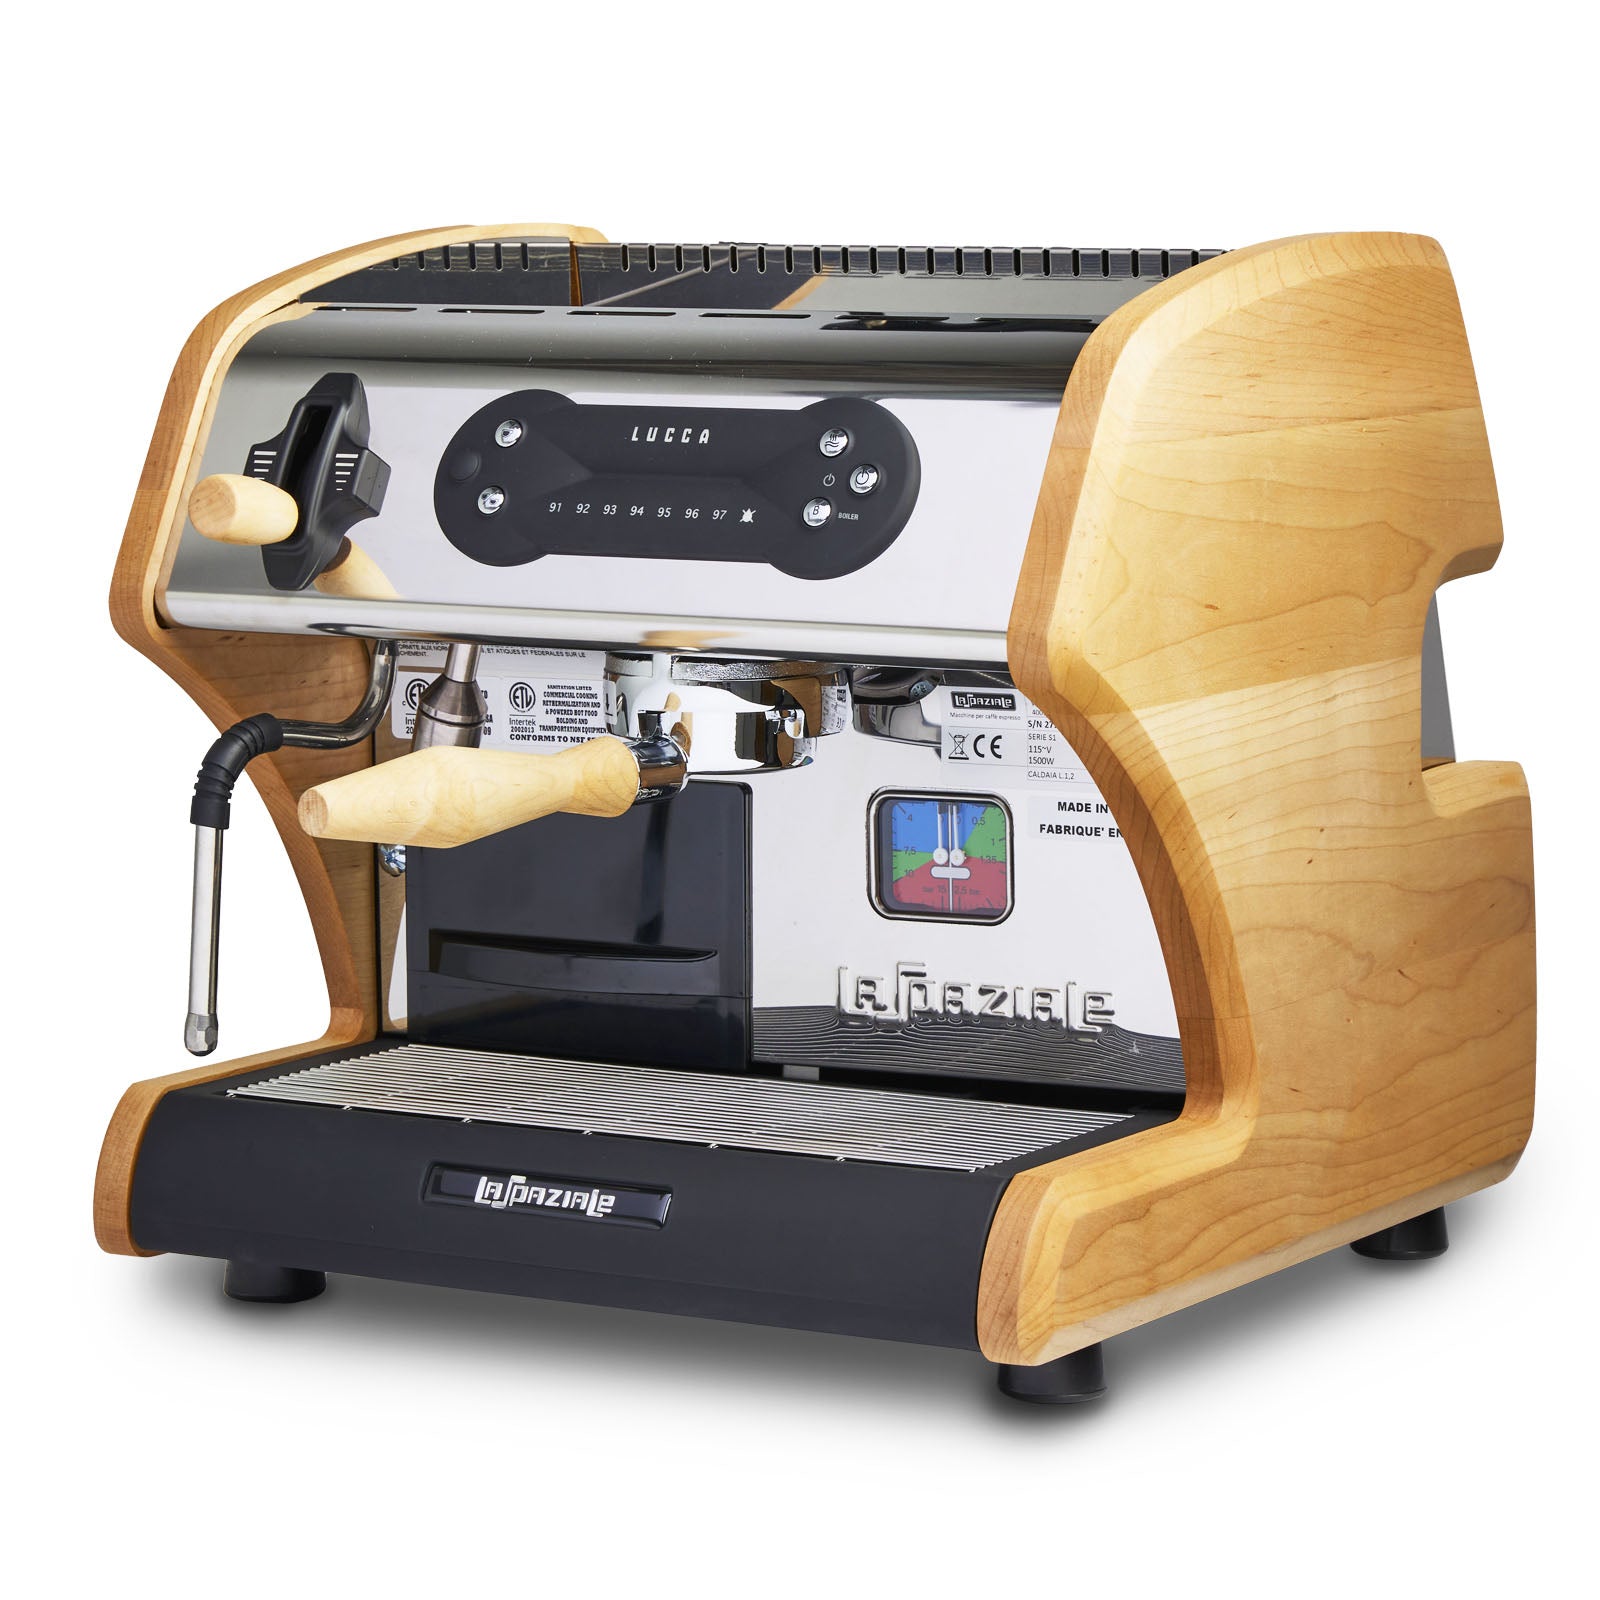 Lucca A53 Mini Espresso Machine by La Spaziale with maple side panels by Clive Coffee - Knockout (Maple)